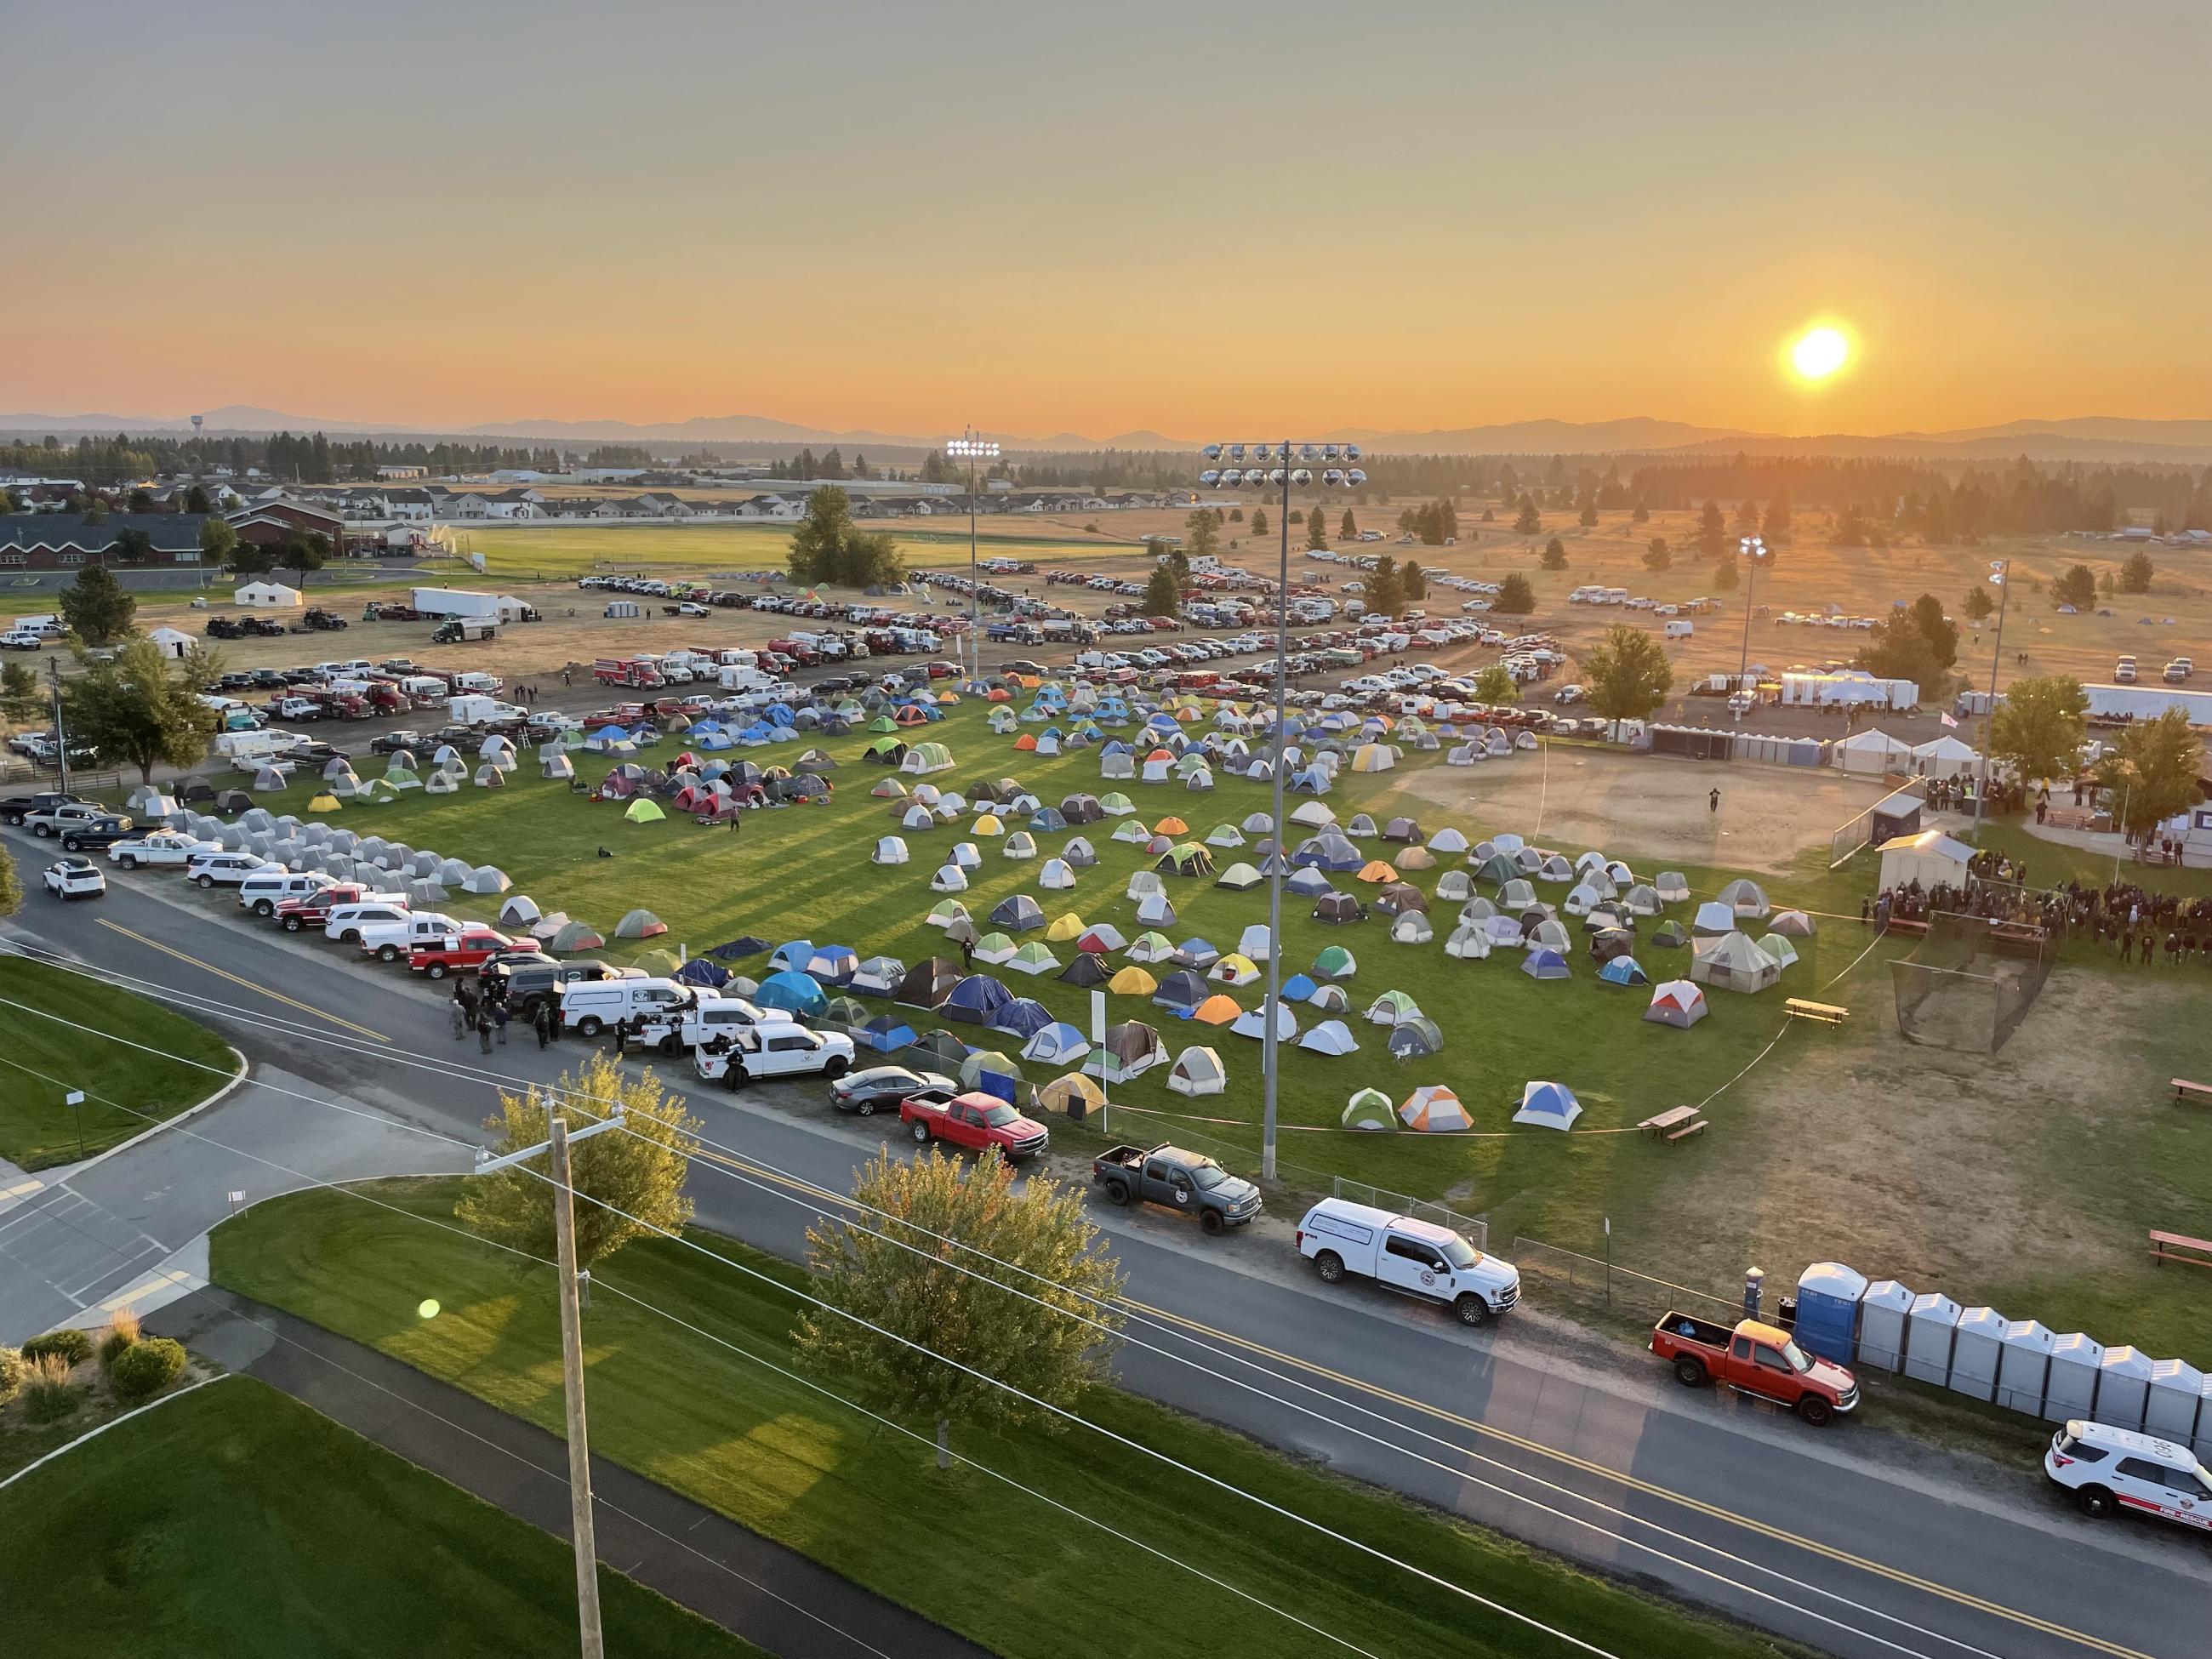 Overview photos of tents and parked vehicles 